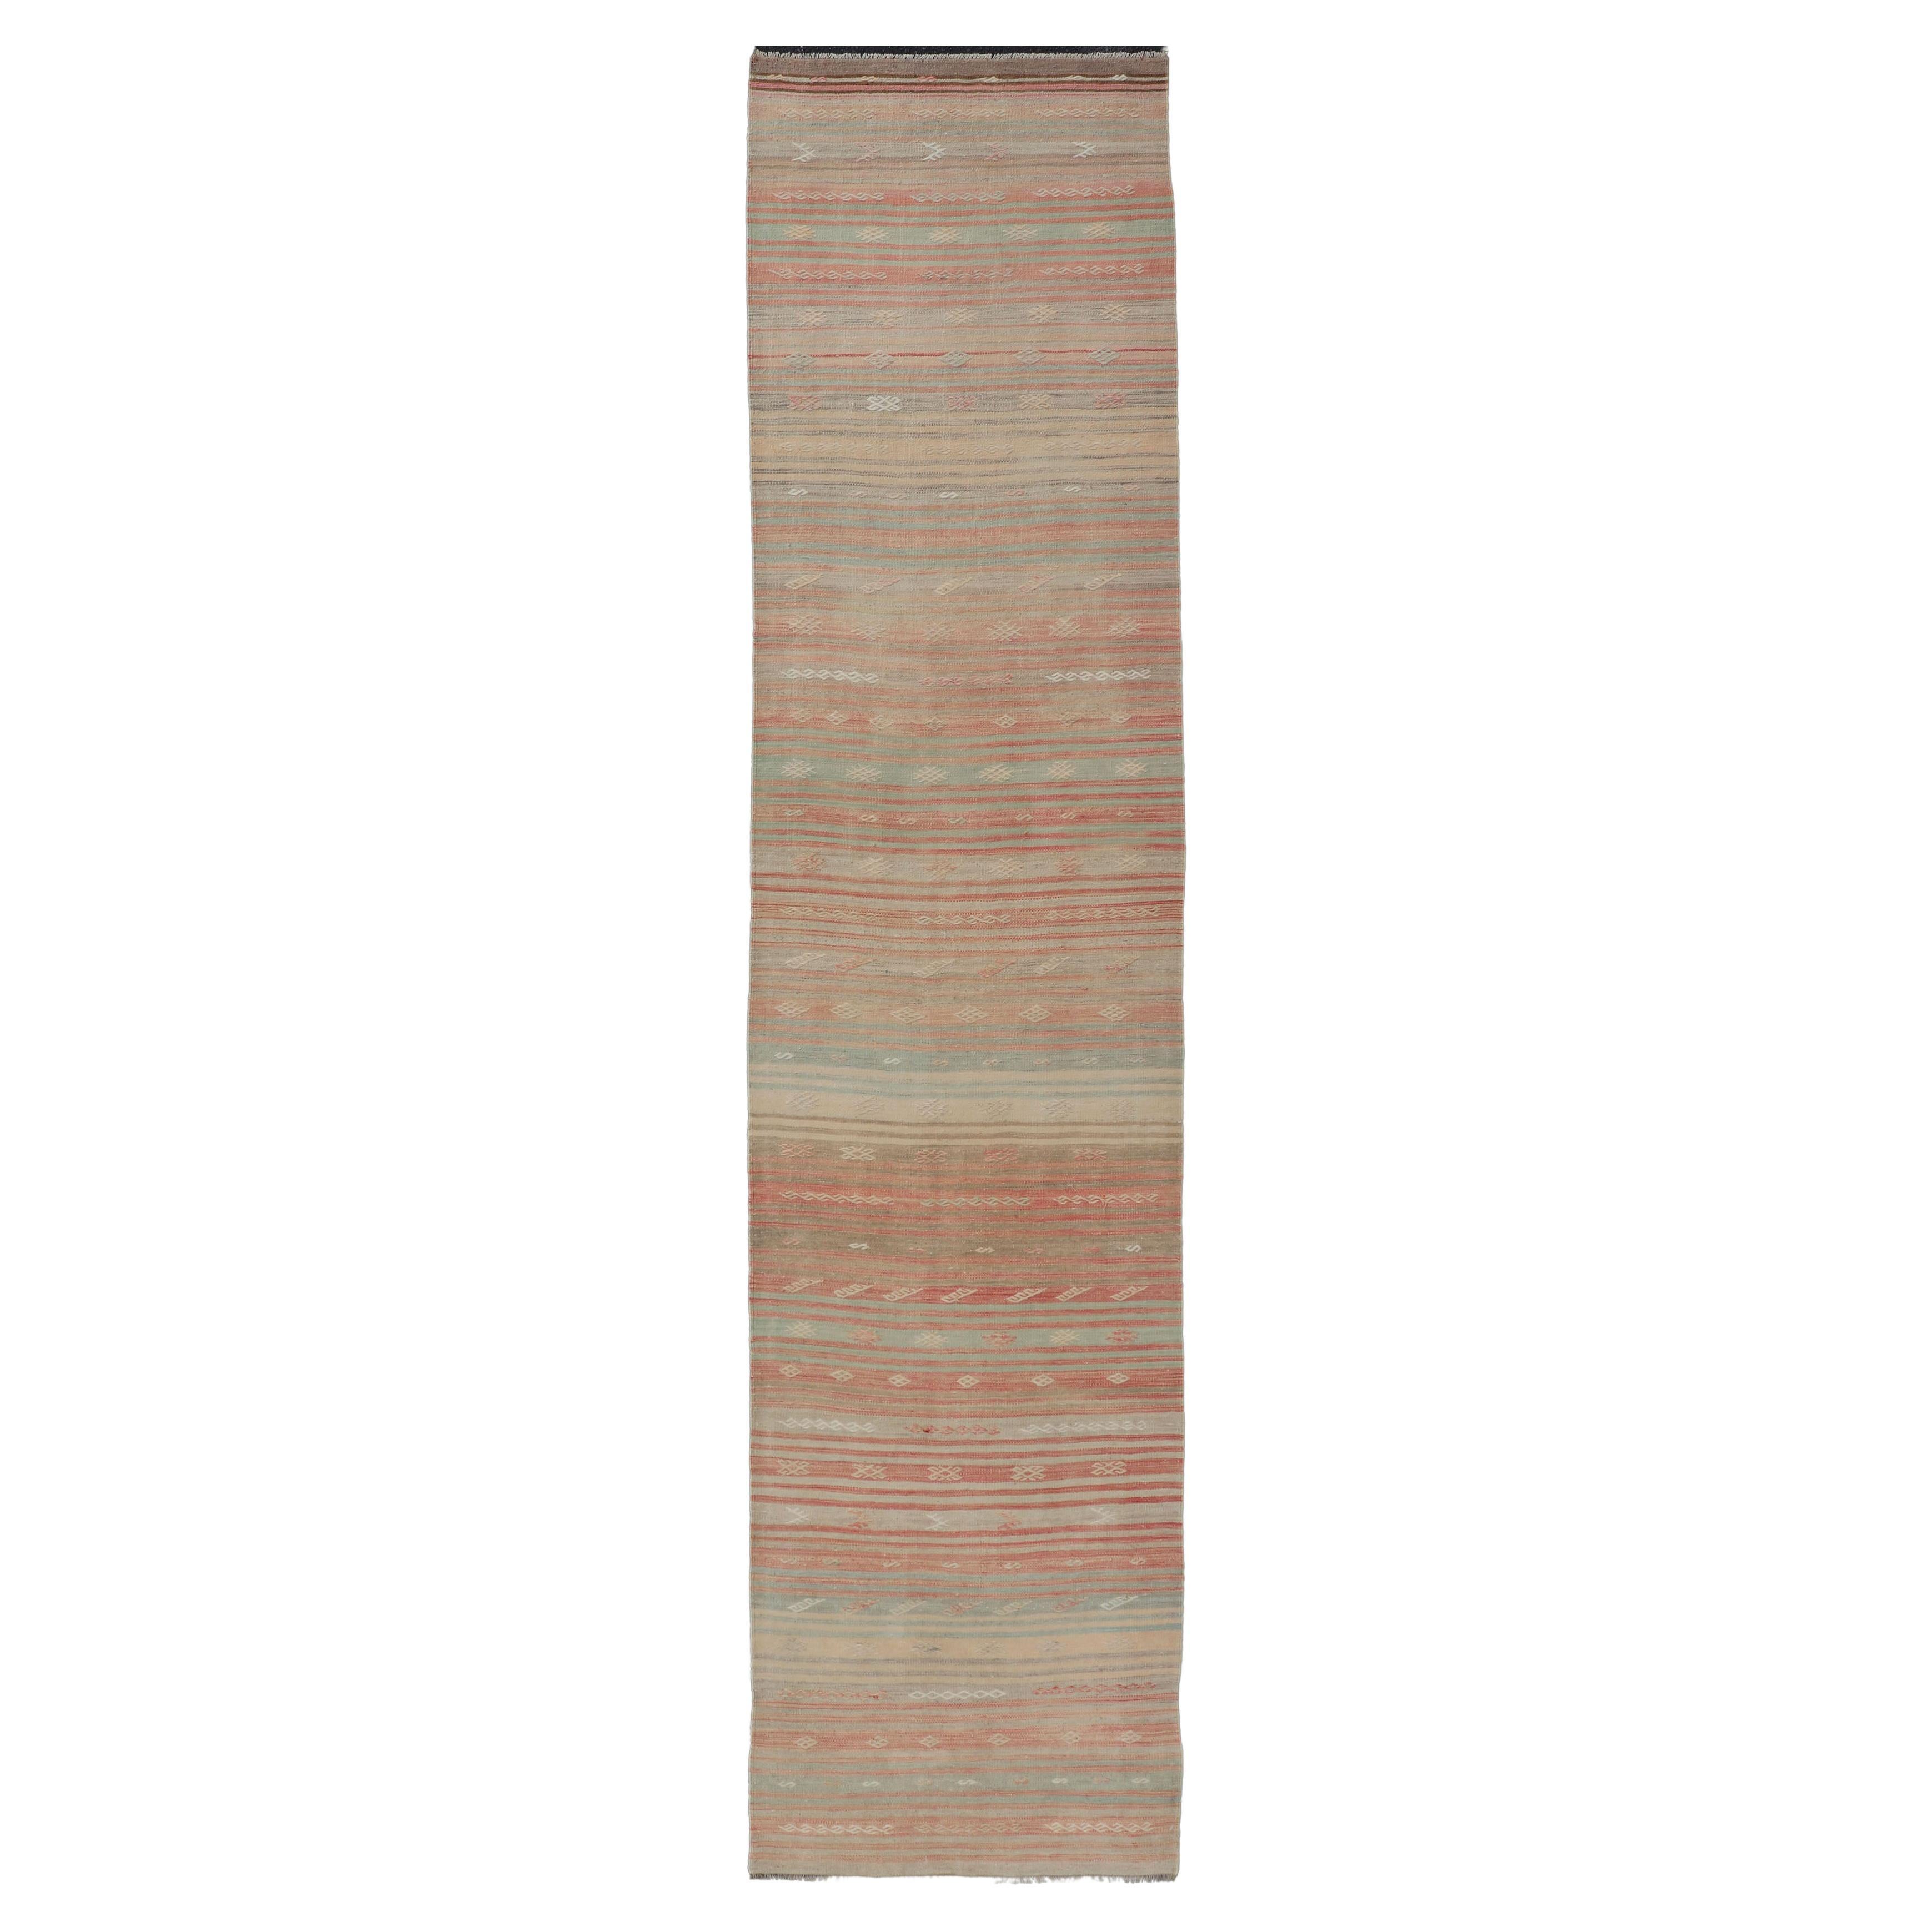 Vintage Kilim Runner with Stripes and Geometric Tribal Motifs in Light Tones